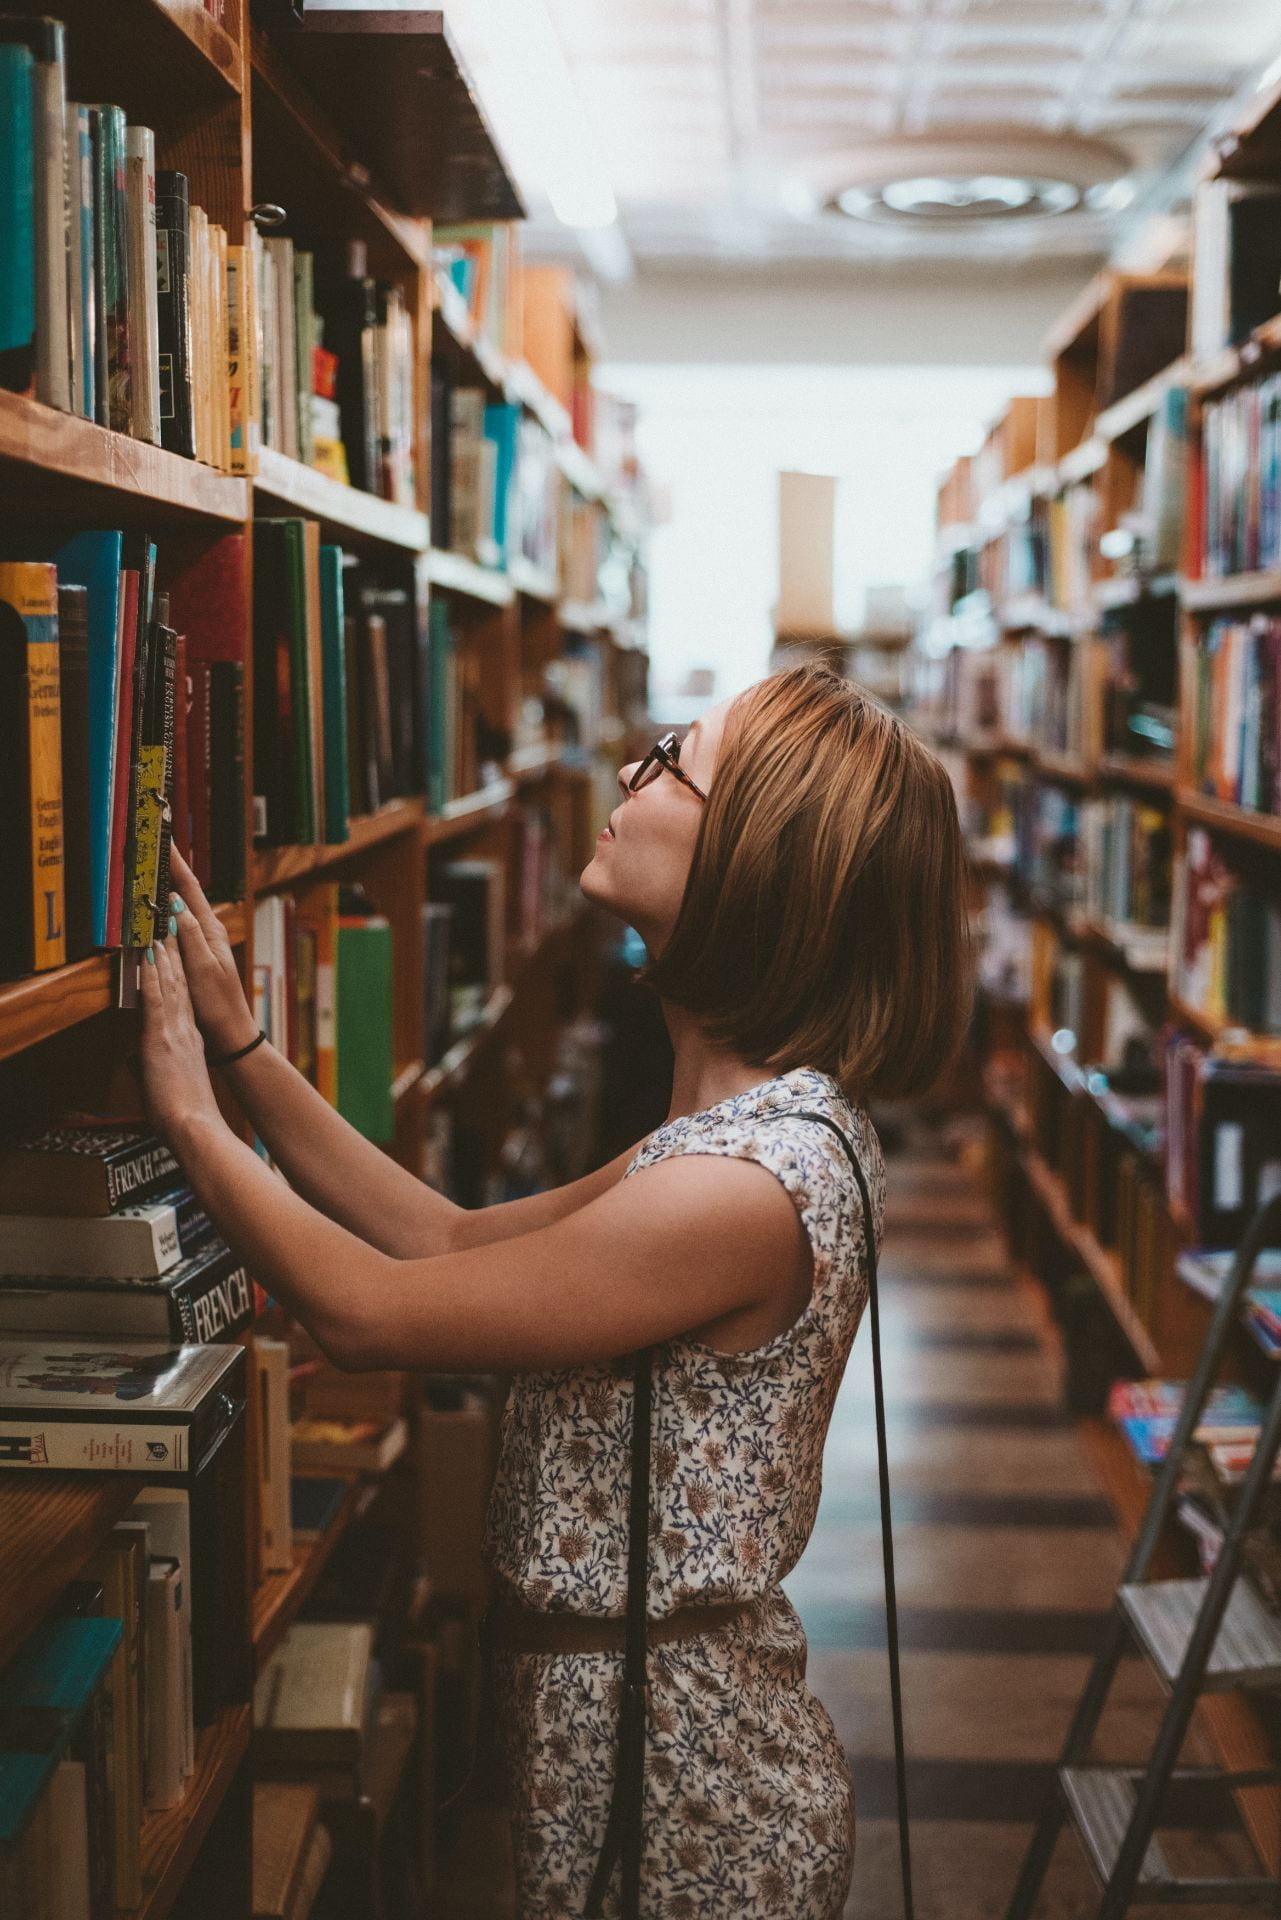 Woman looking through book spines in a bookstore.